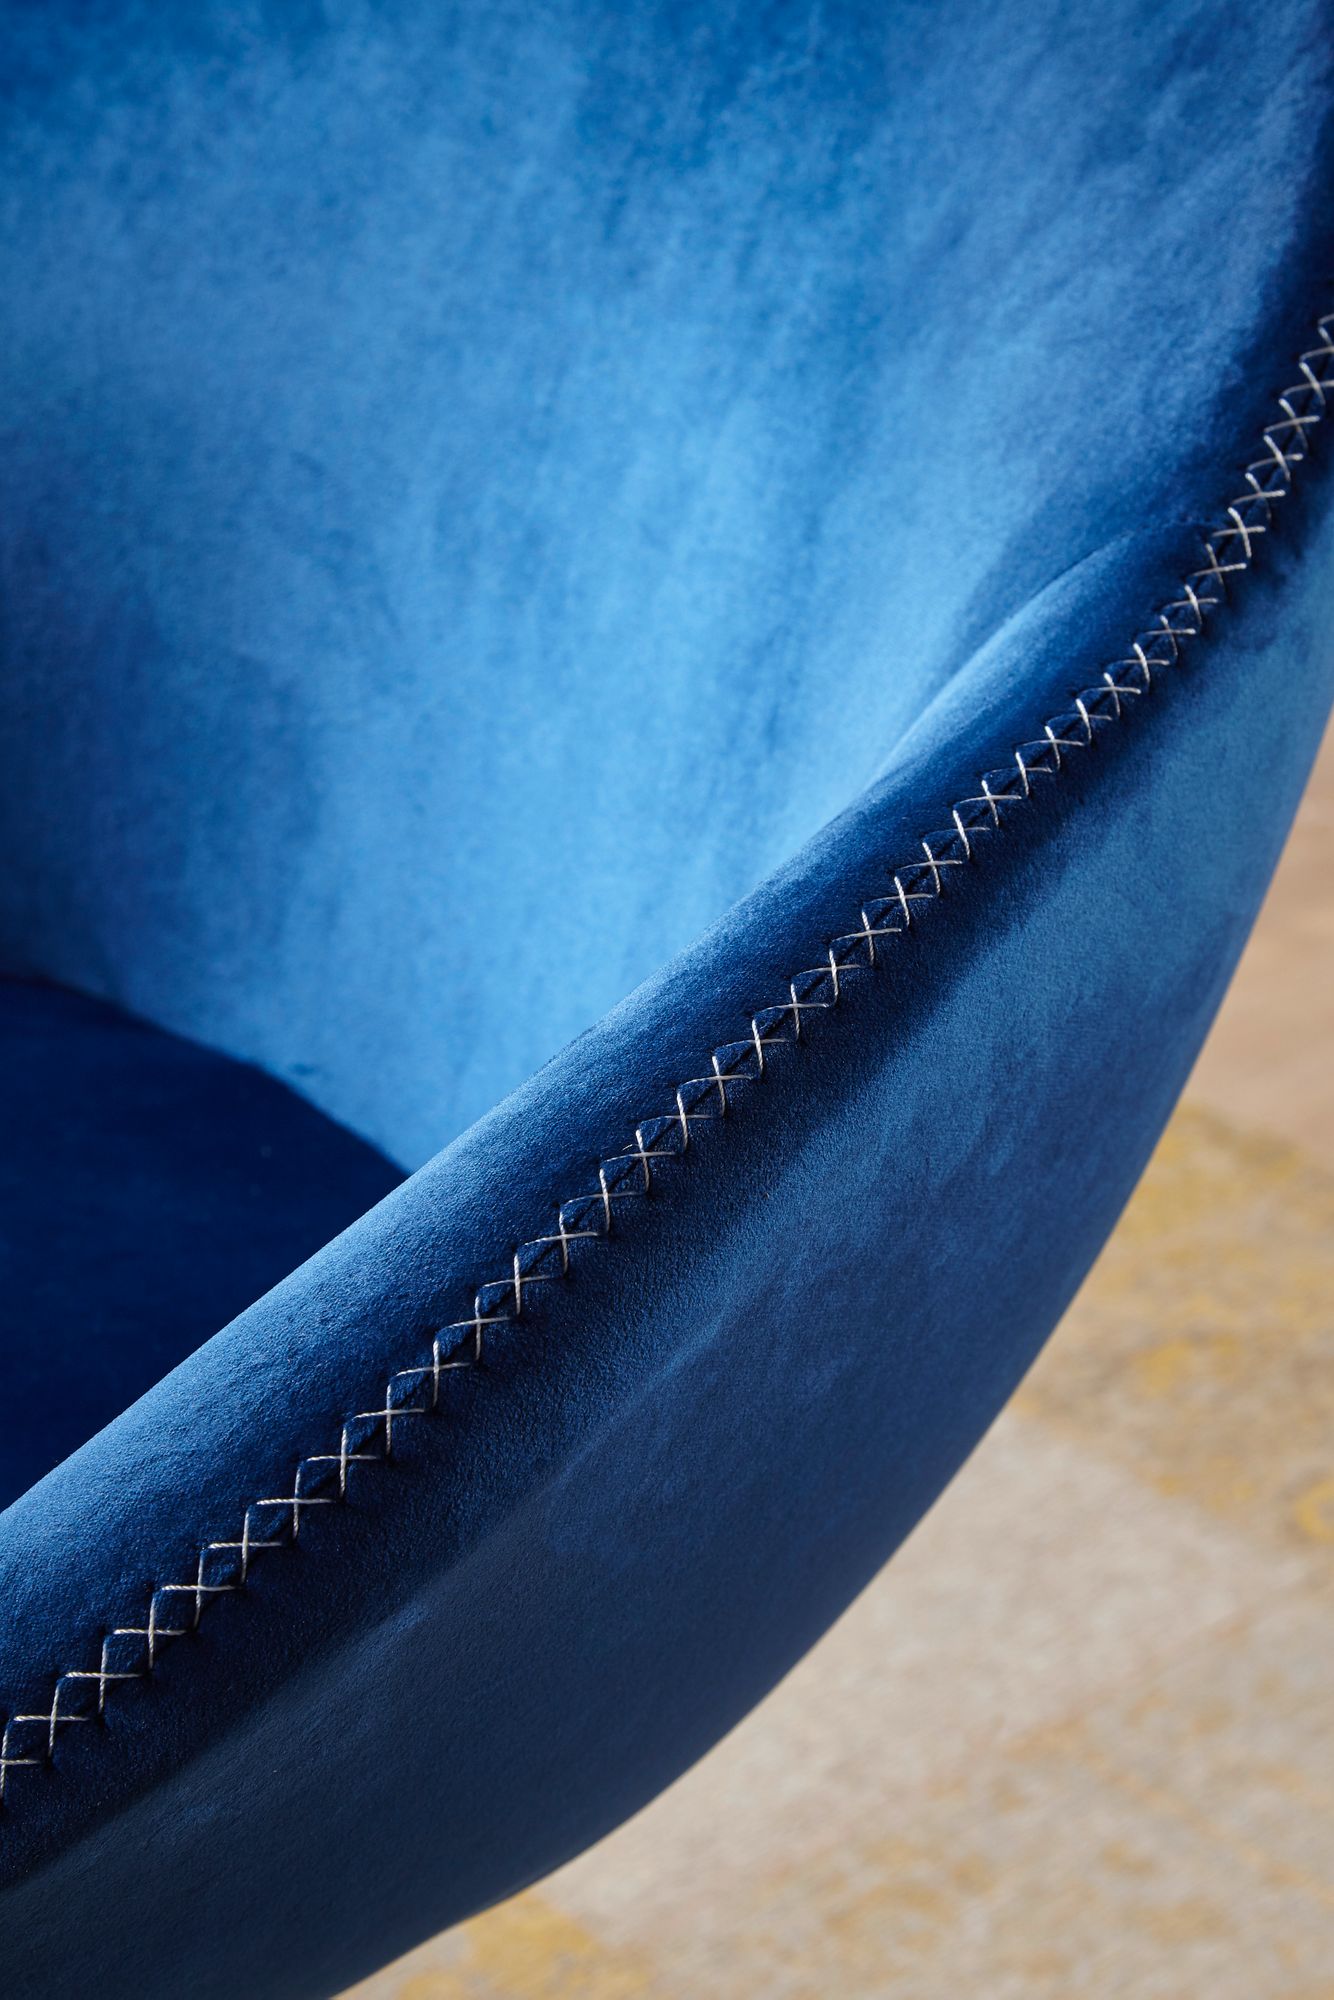 lounge fauteuil blauw